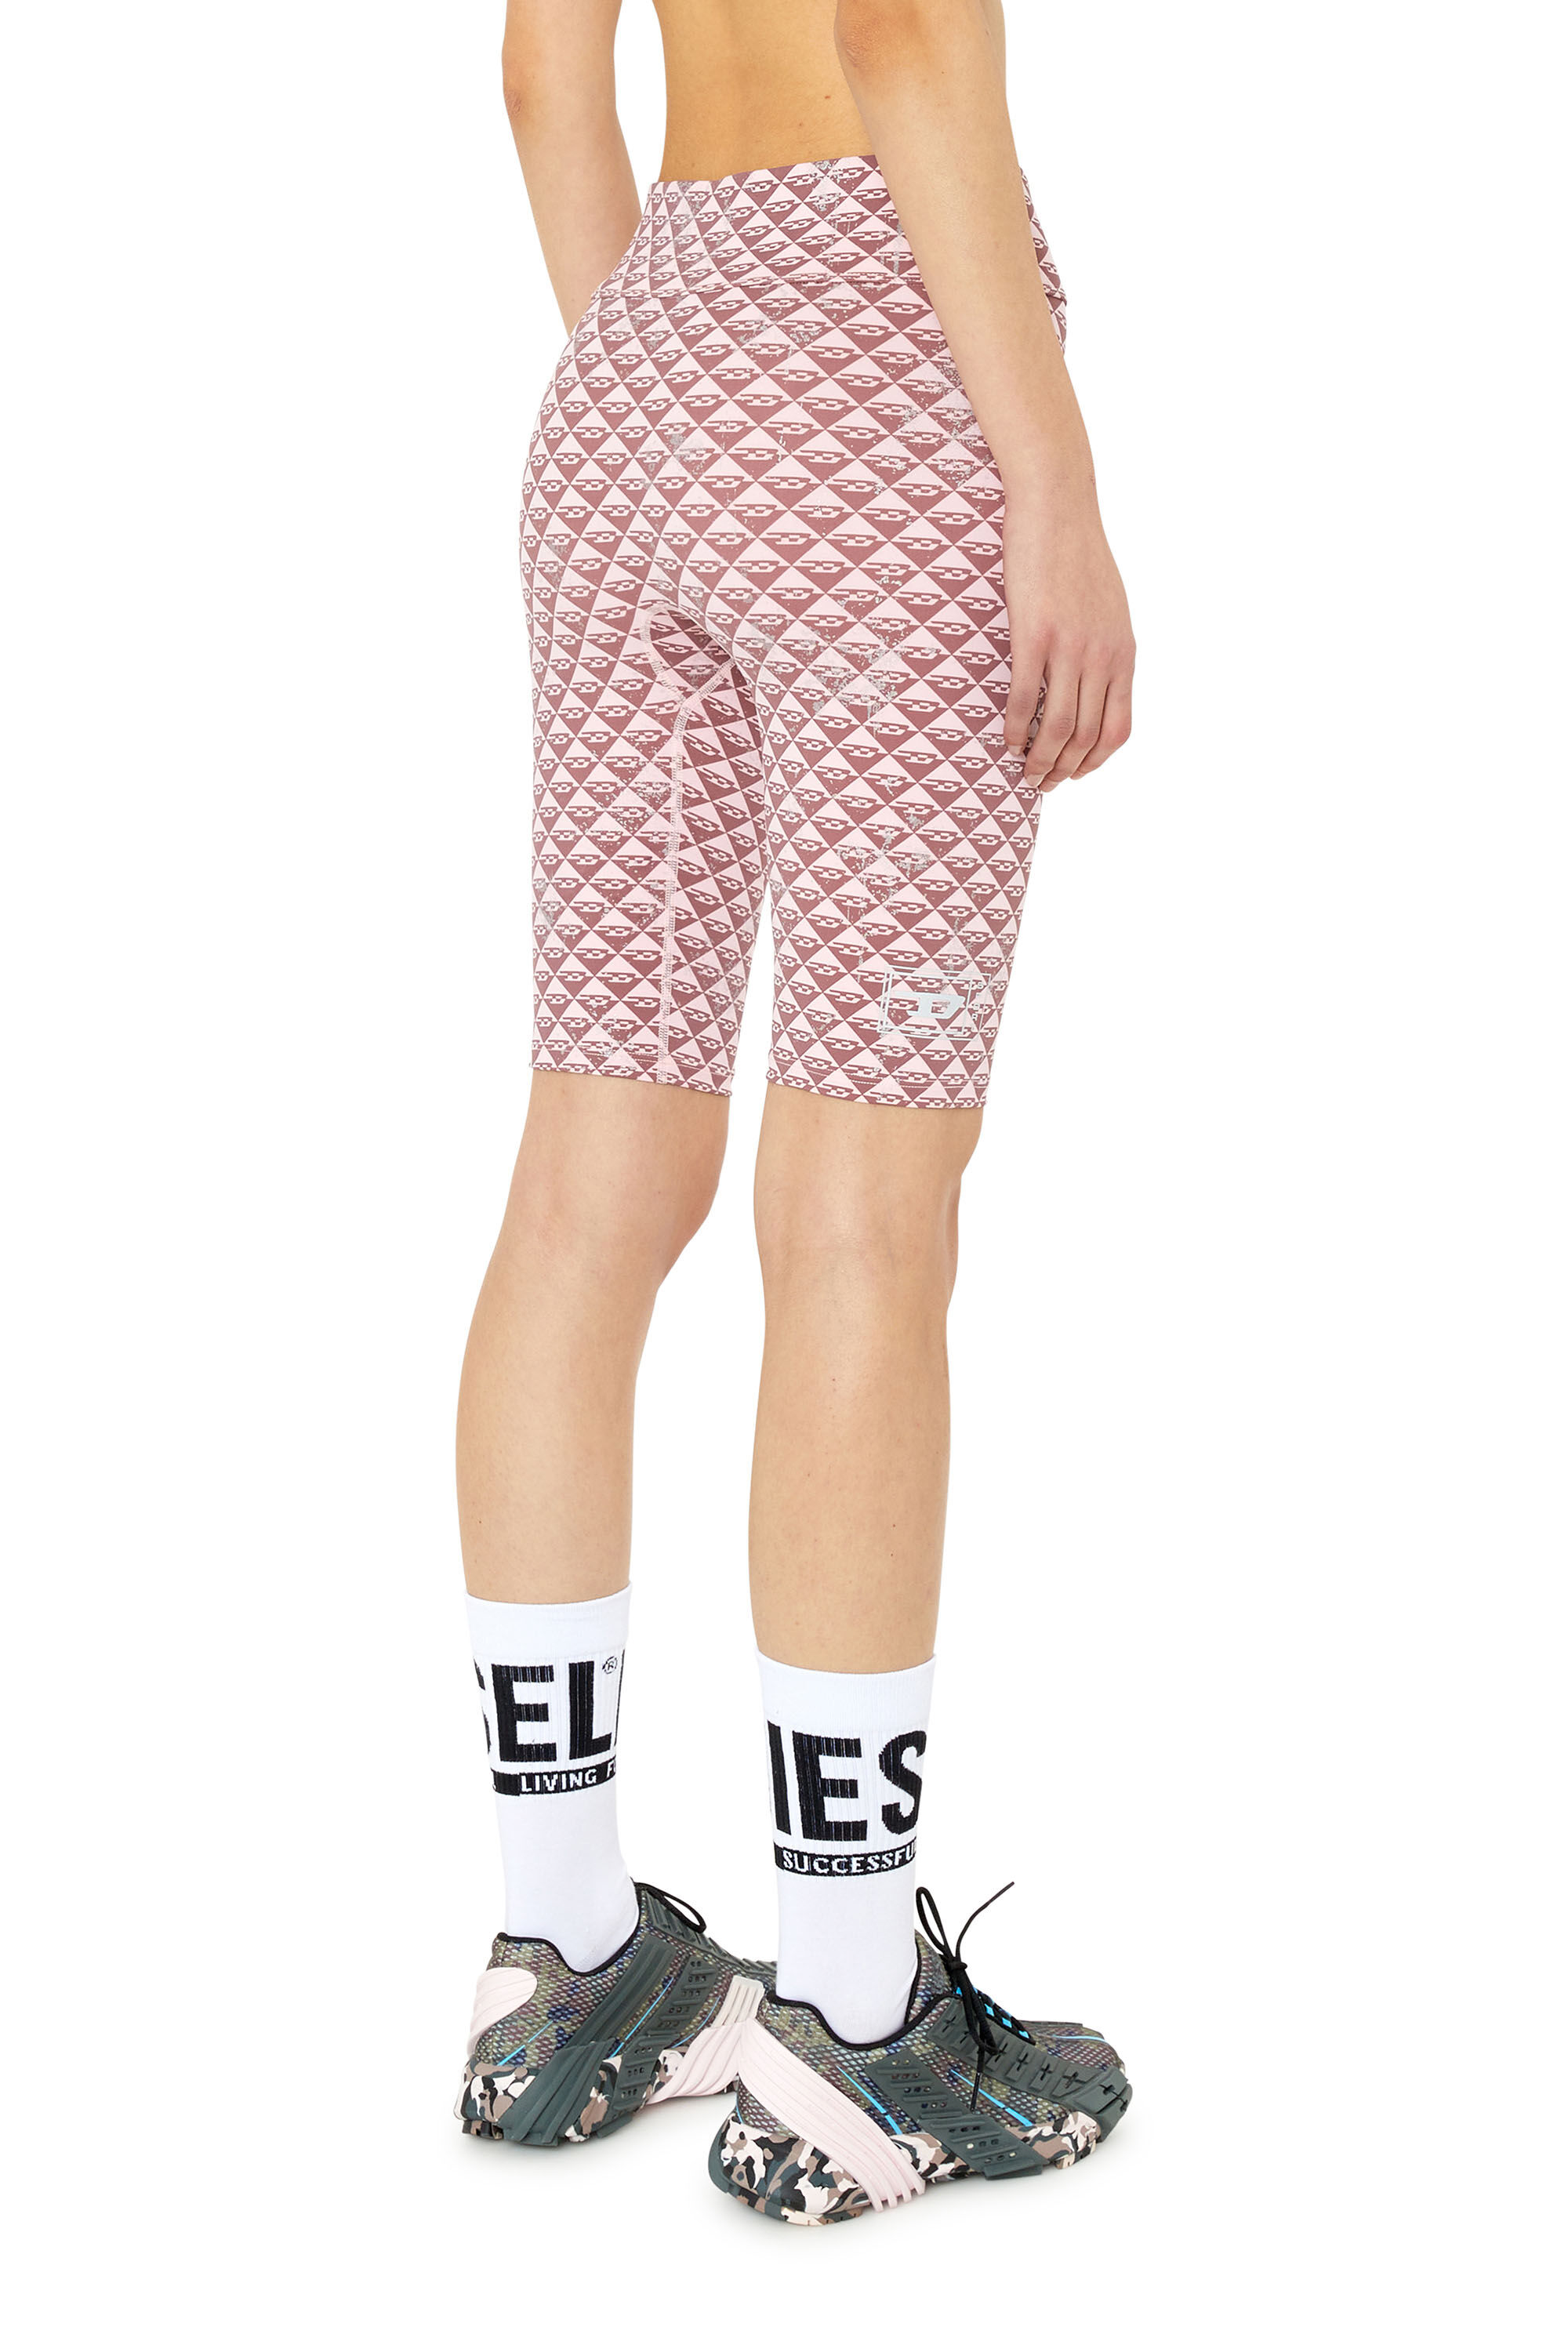 AWSB-JIA-WT21 Woman: Cycling shorts with reflective details | Diesel